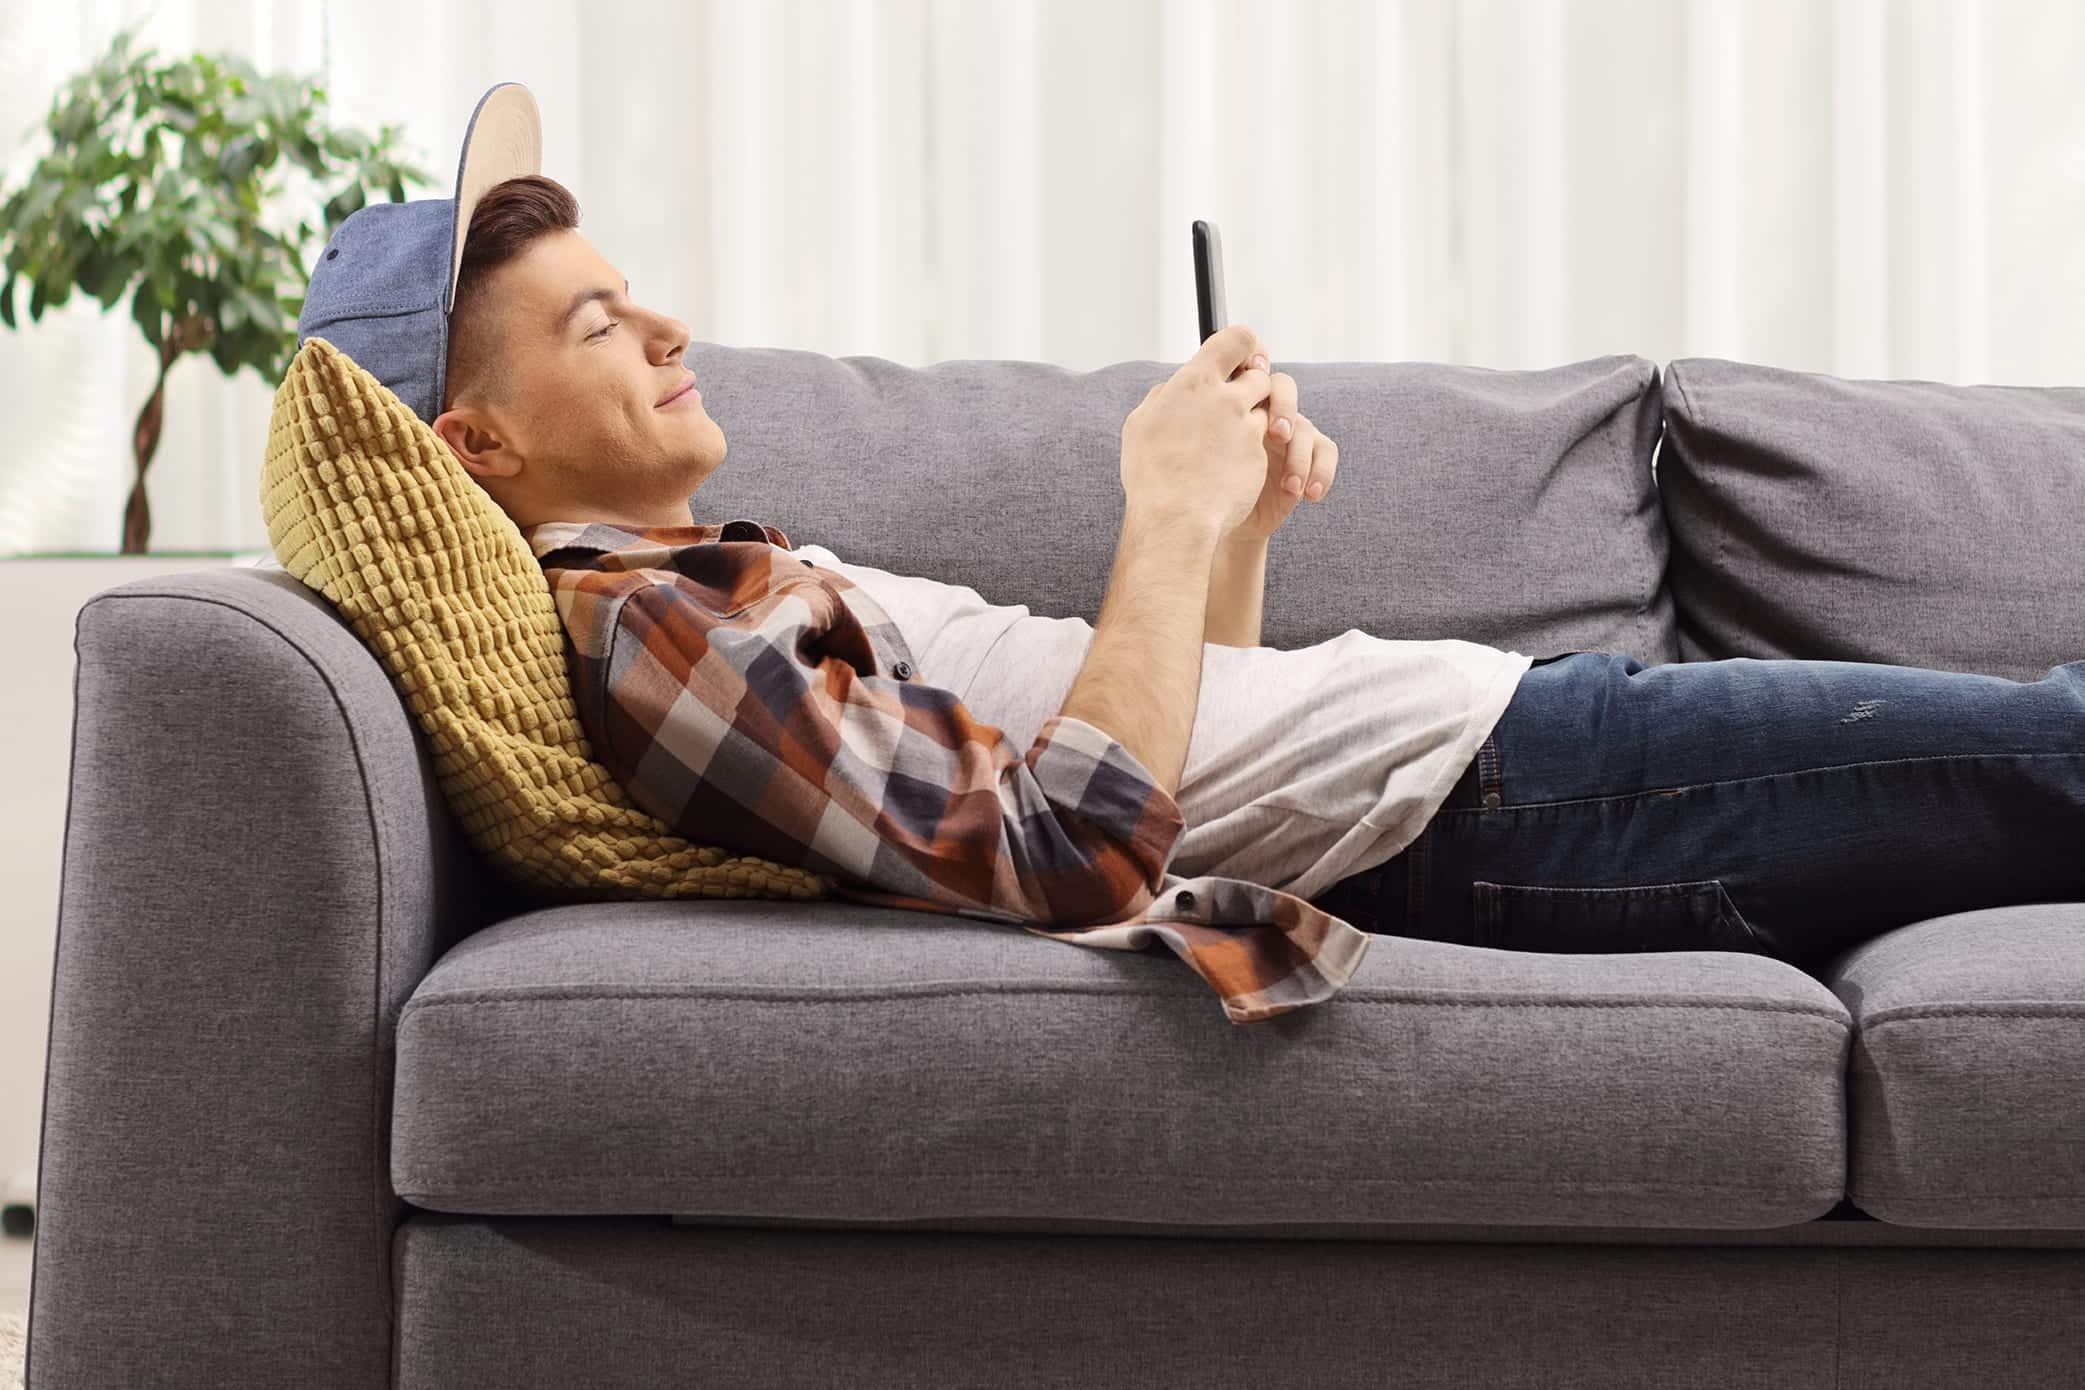 man relaxing on couch looking at phone